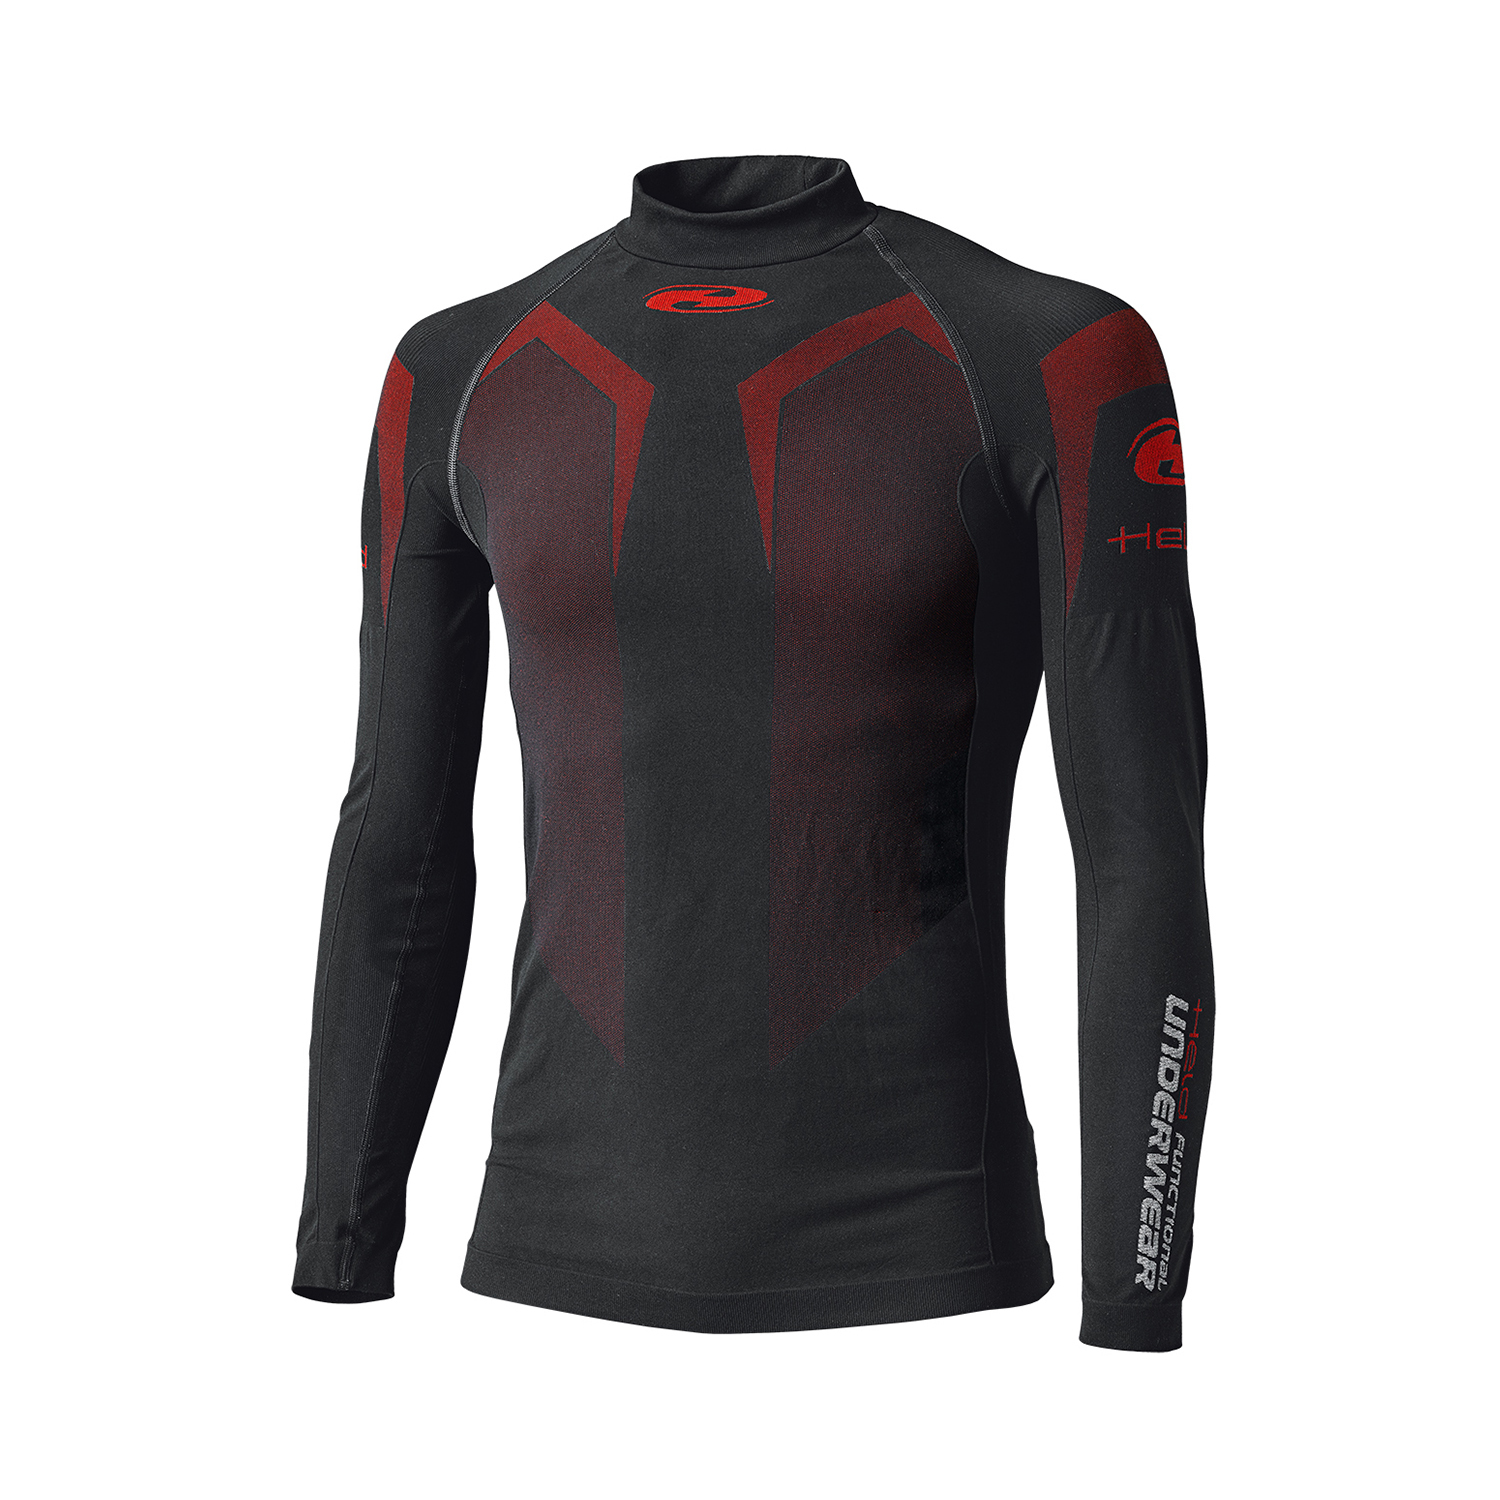 Held 3D Skin Warm Top Long Sleeves - Available in Various Sizes